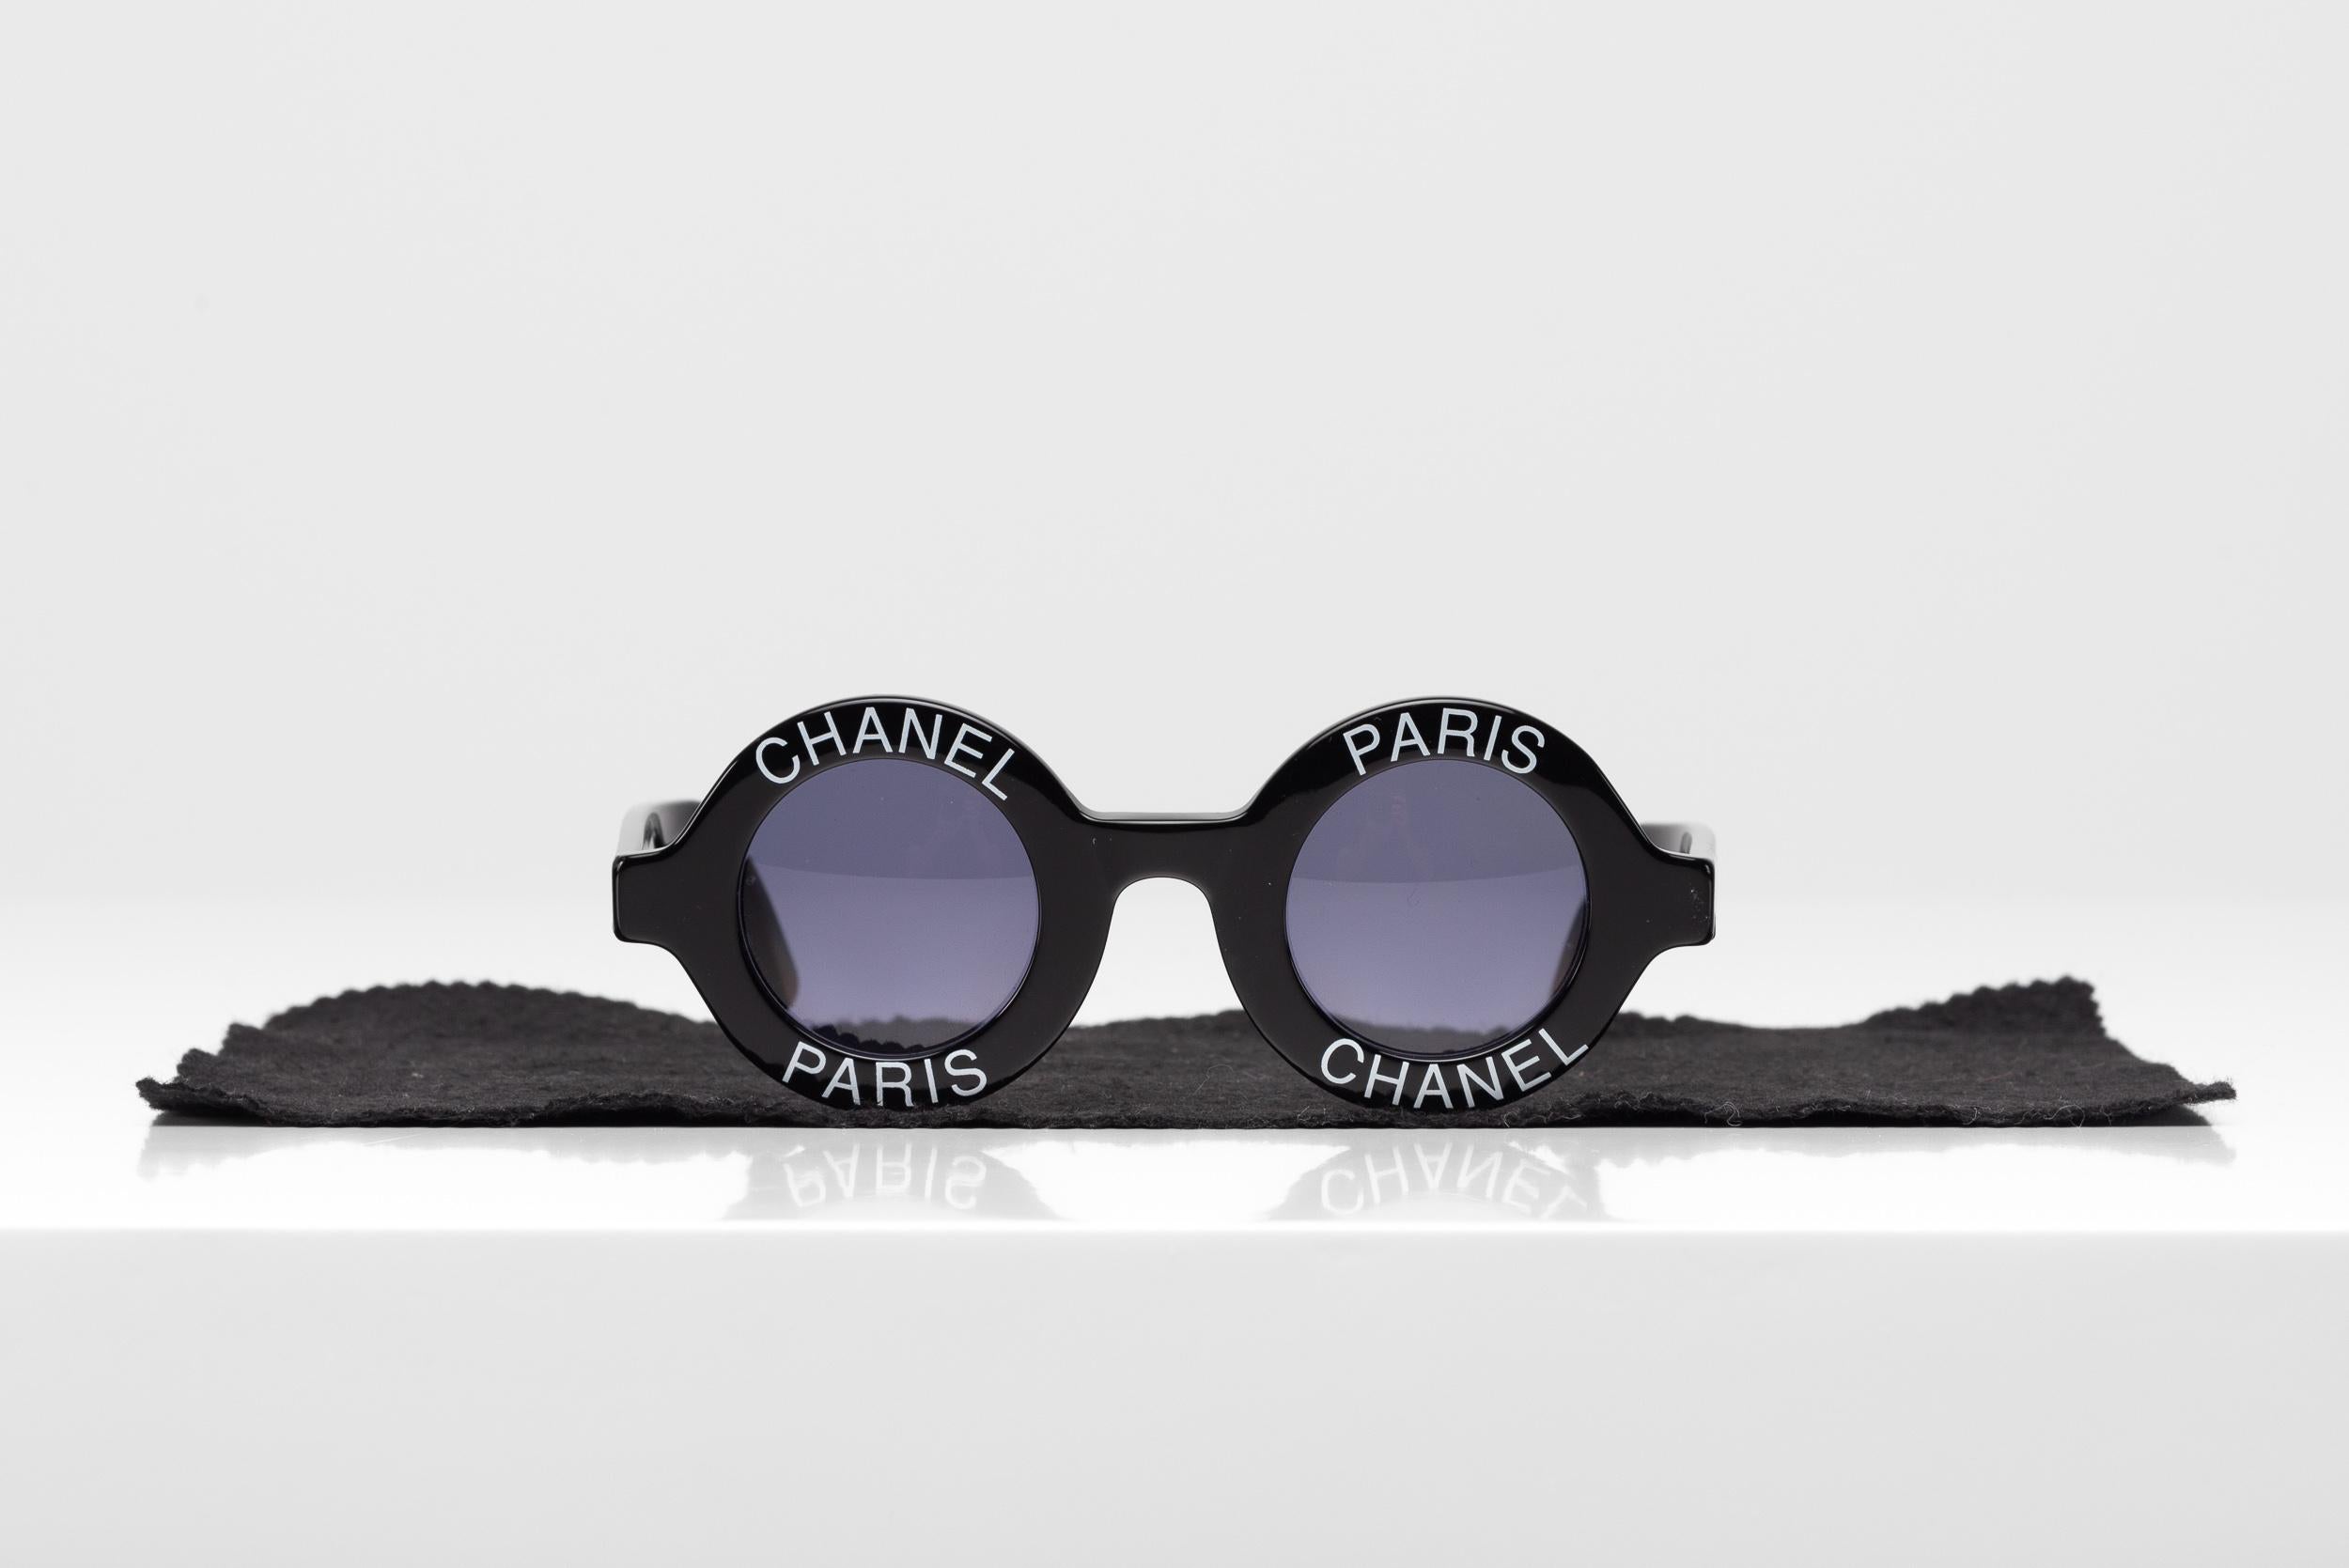 From the collection of SAVINETI we offer these Chanel Vintage Sunglasses:
- Brand: Chanel
- Model: Round Logo Sunglasses
- Year: 90's
- Condition: Good

Fashion statements, Chanel’s eyewear float between contemporary innovation and utter classic